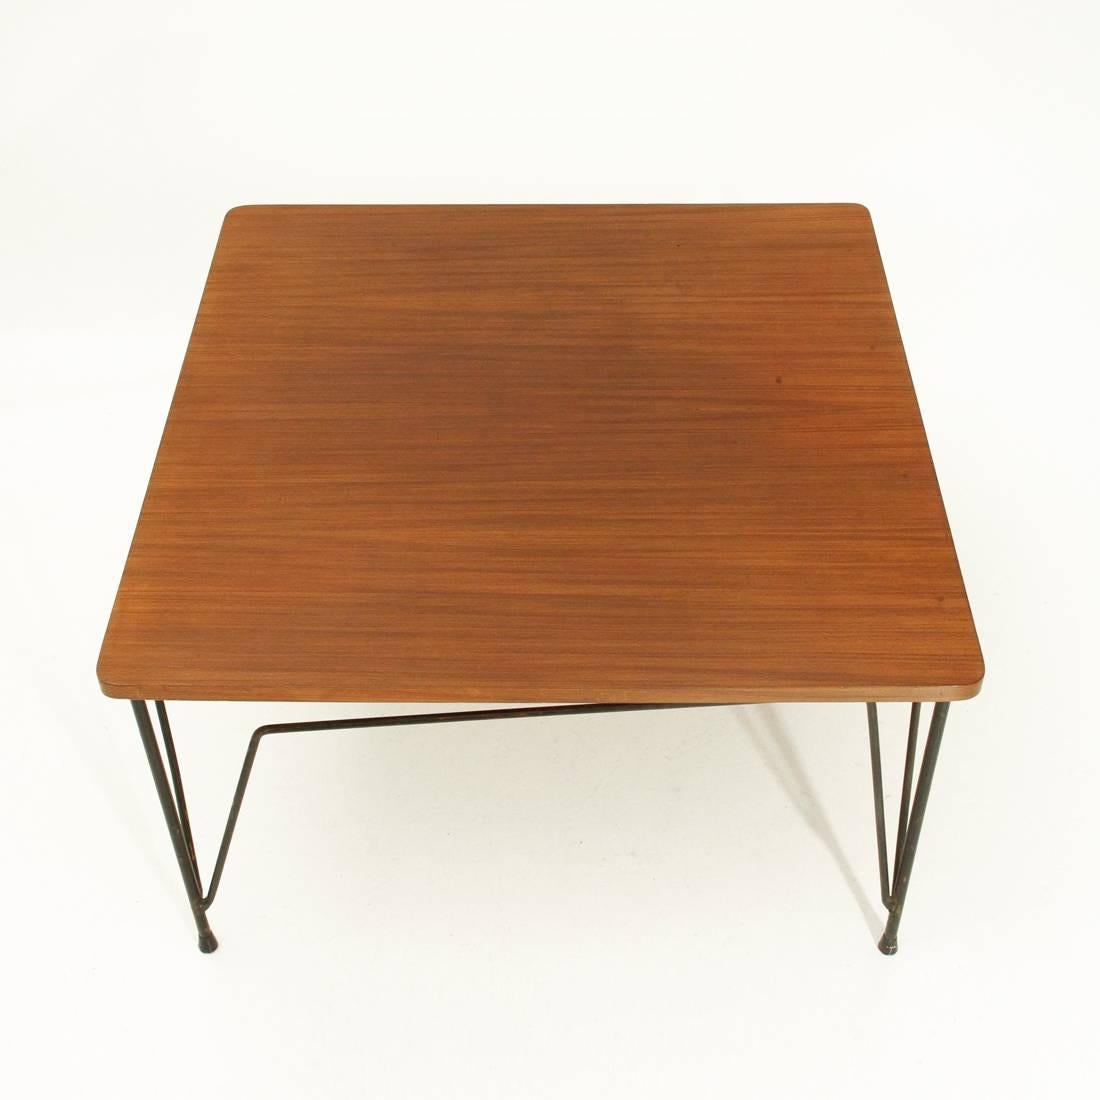 Coffee table produced in the 1950s by Cerutti.
Square top in teak veneered wood.
Legs in black painted metal rod.
Good general conditions.

Dimensions: Width 71 cm, depth 71 cm, height 41.5 cm.
 